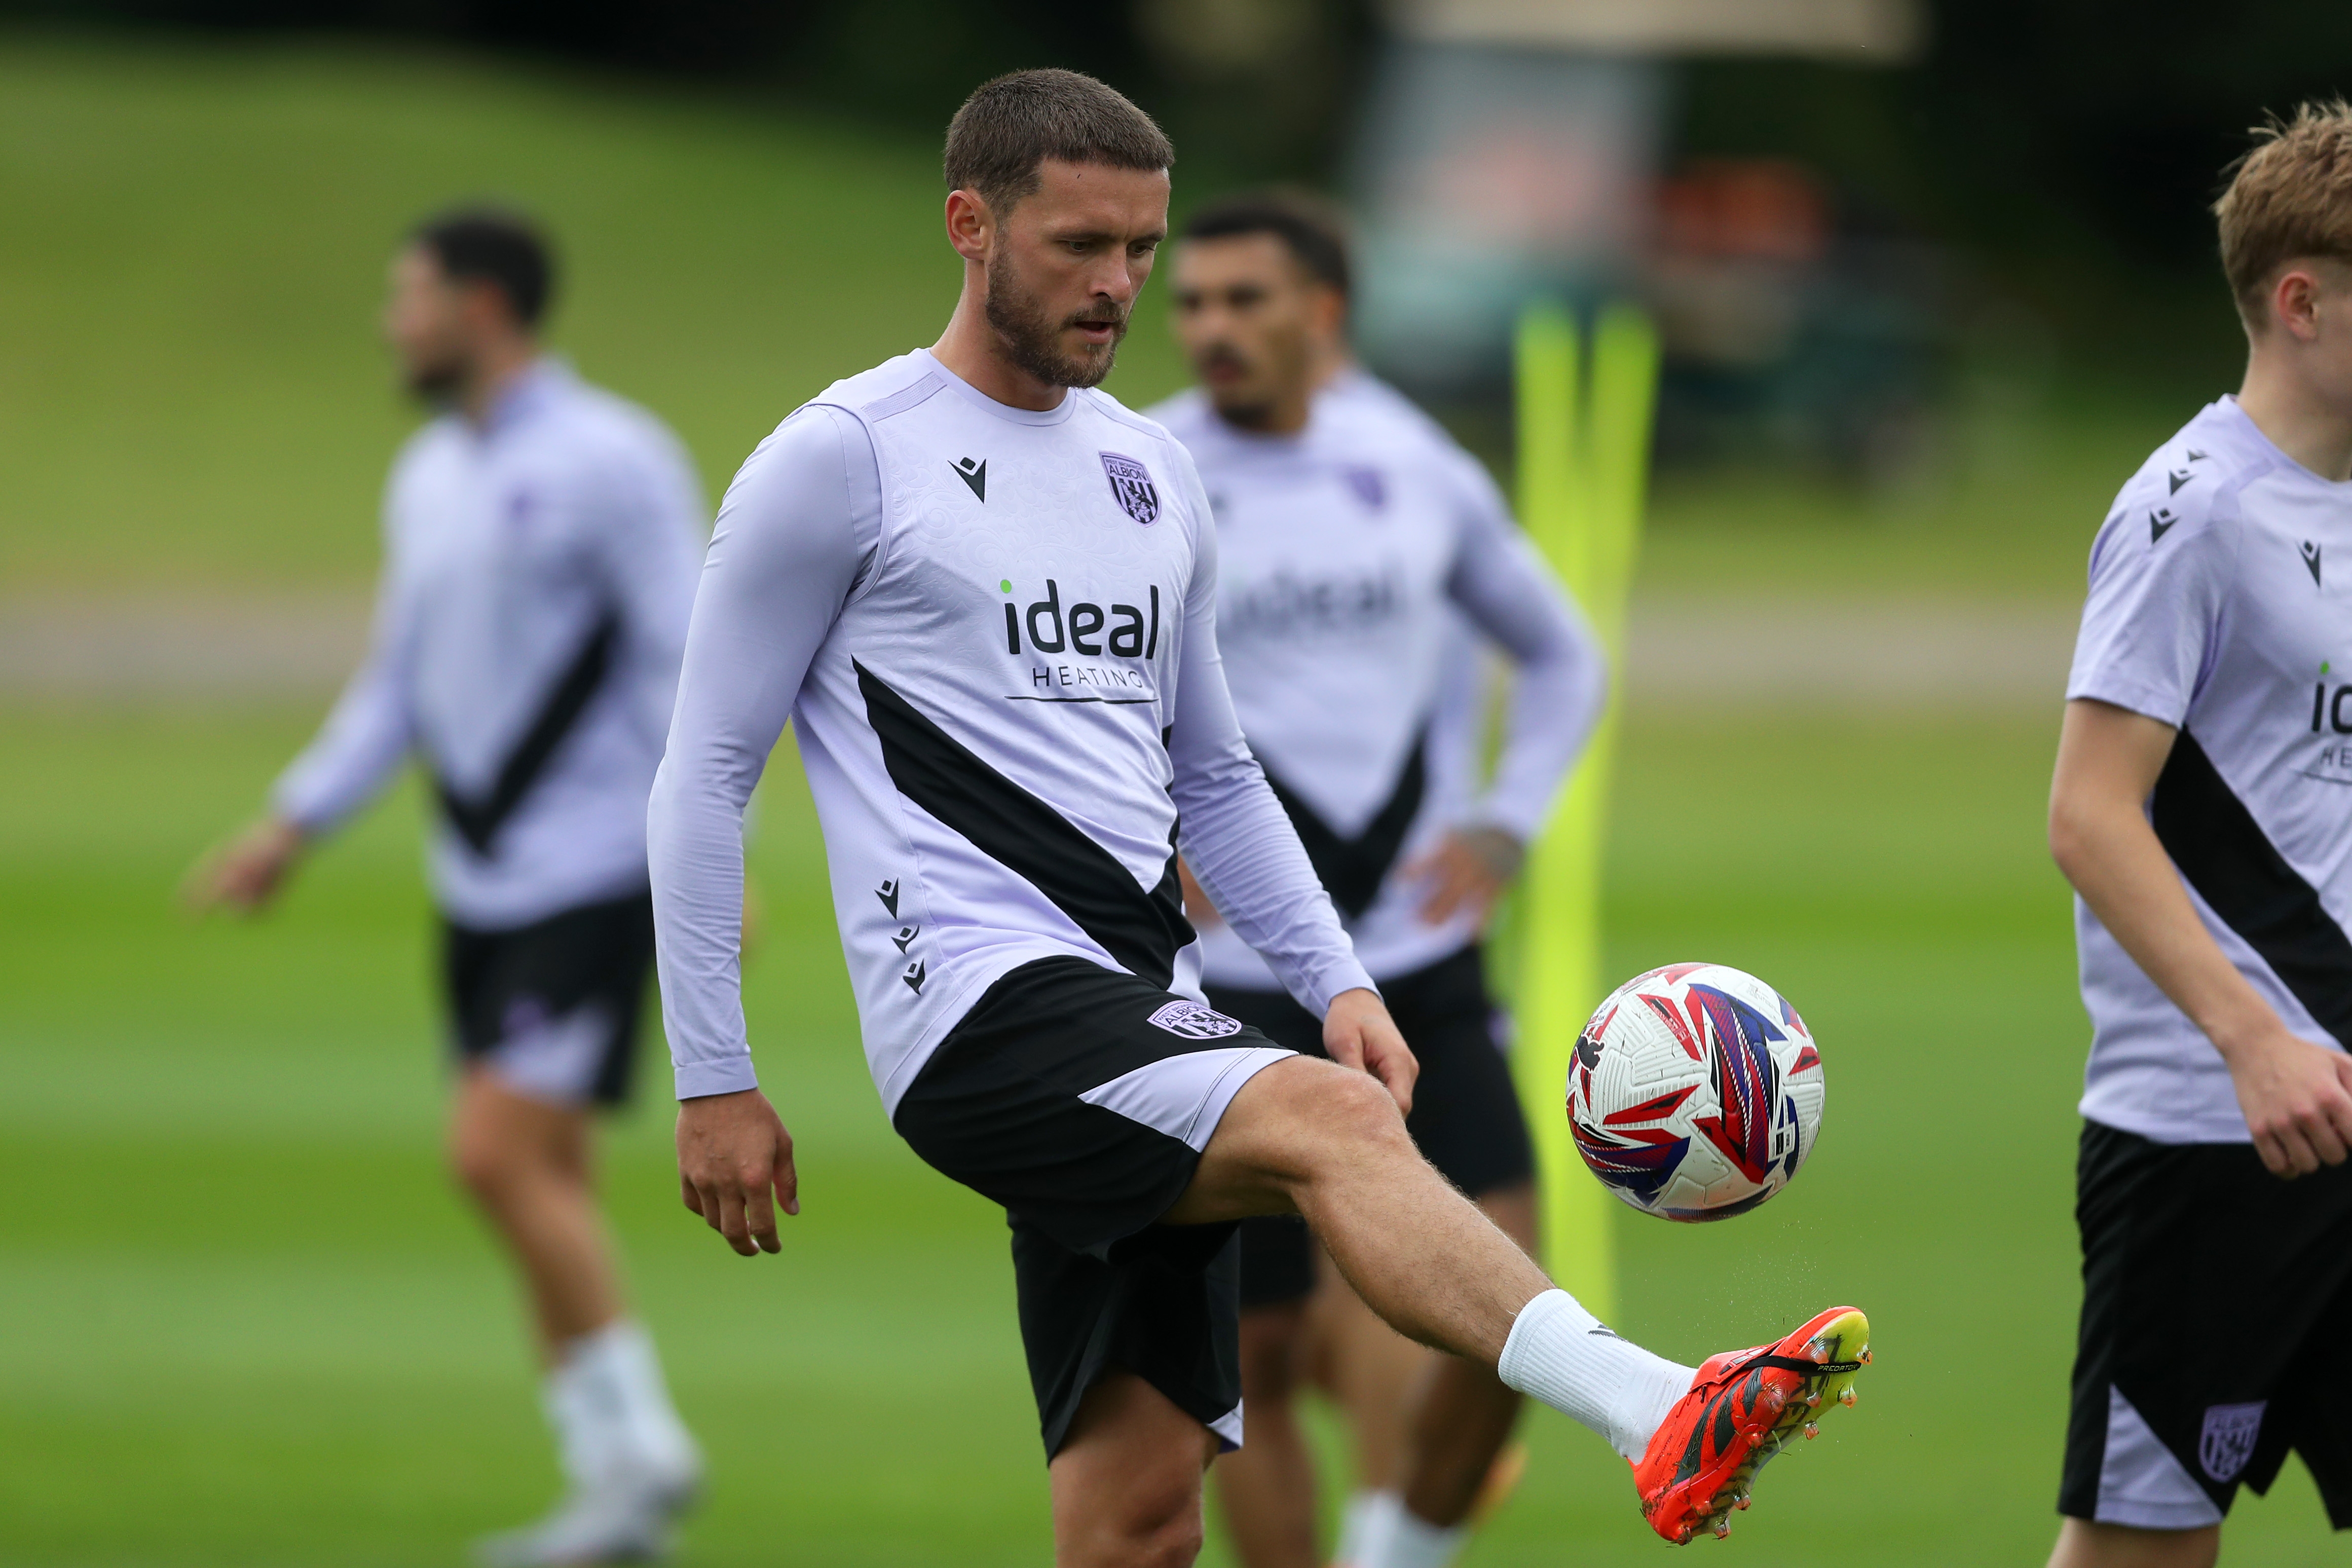 John Swift controlling a ball during a training session 